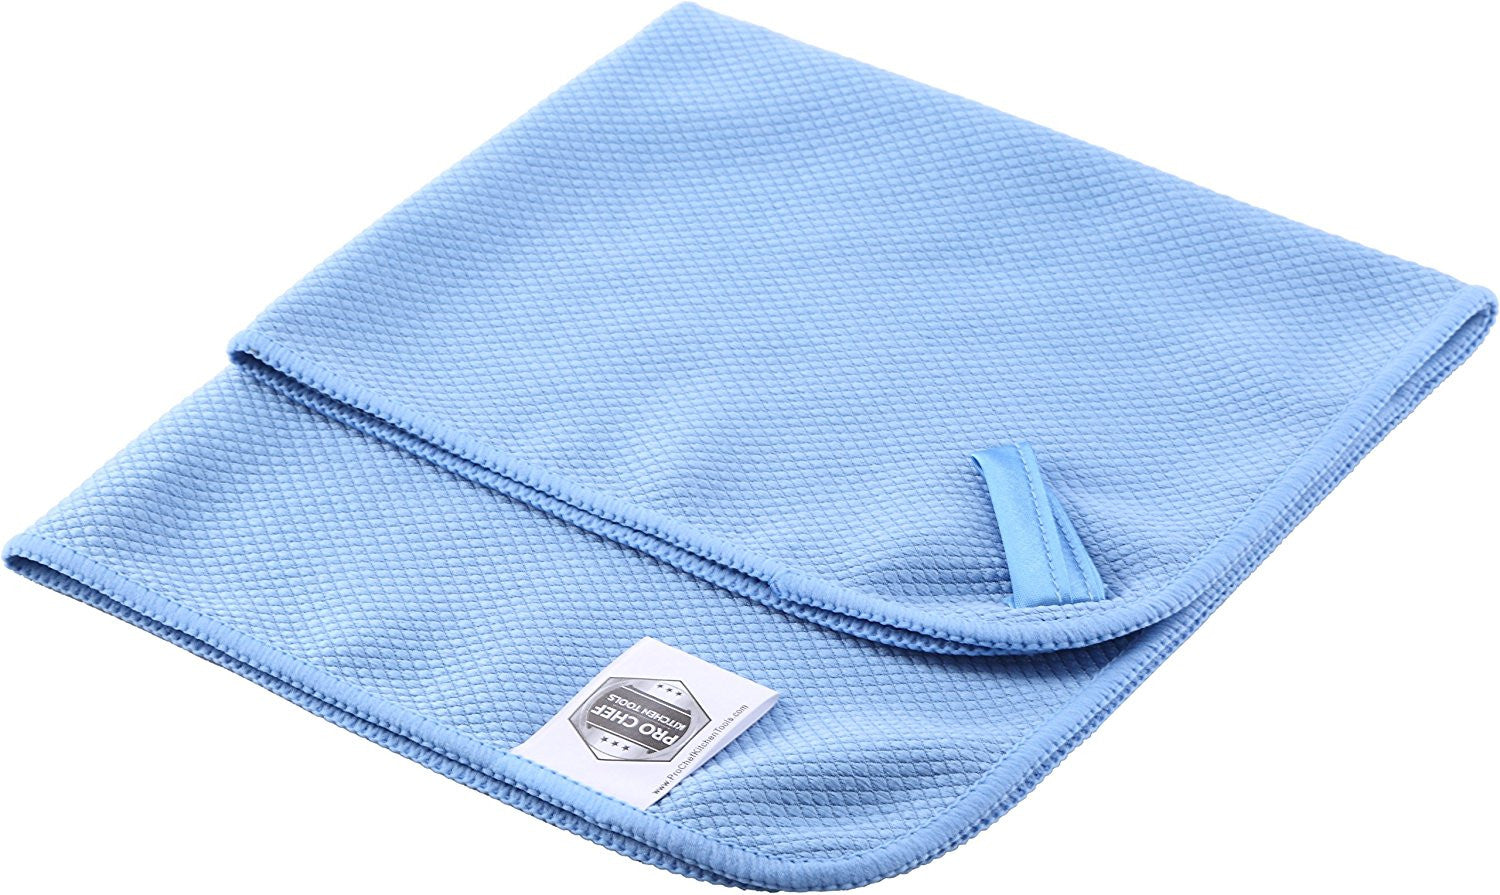 Microfiber Cleaning Cloth - Household Wipes And Cloths – Pro Chef Kitchen  Tools